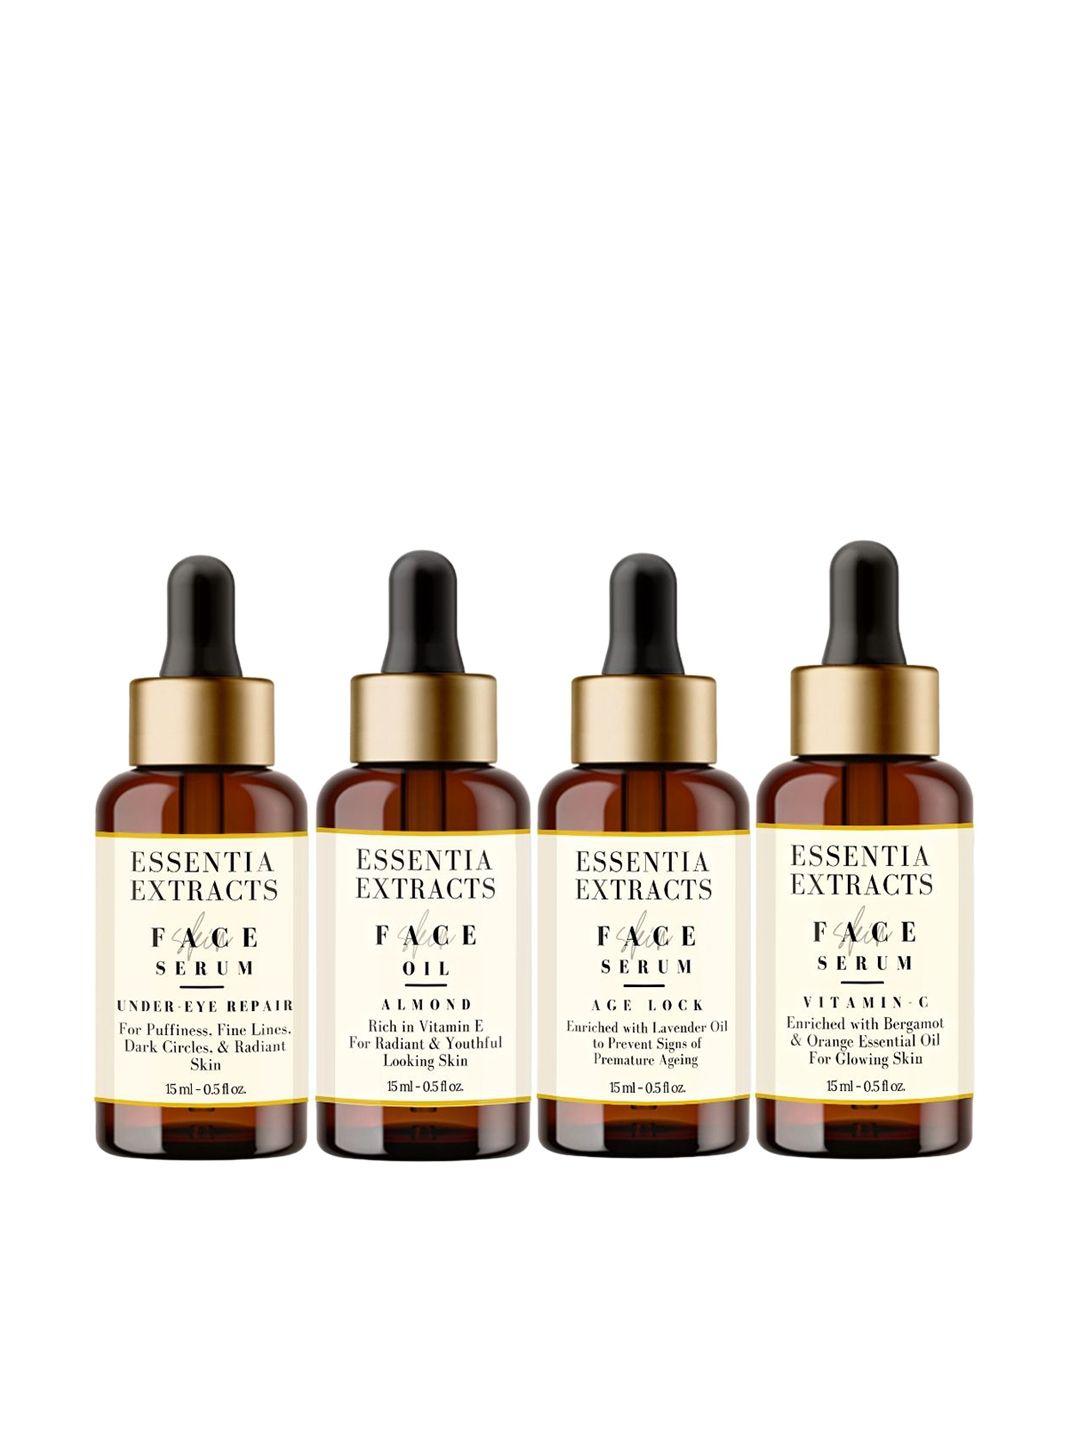 essentia extracts set of 4 face serums - 15 ml each